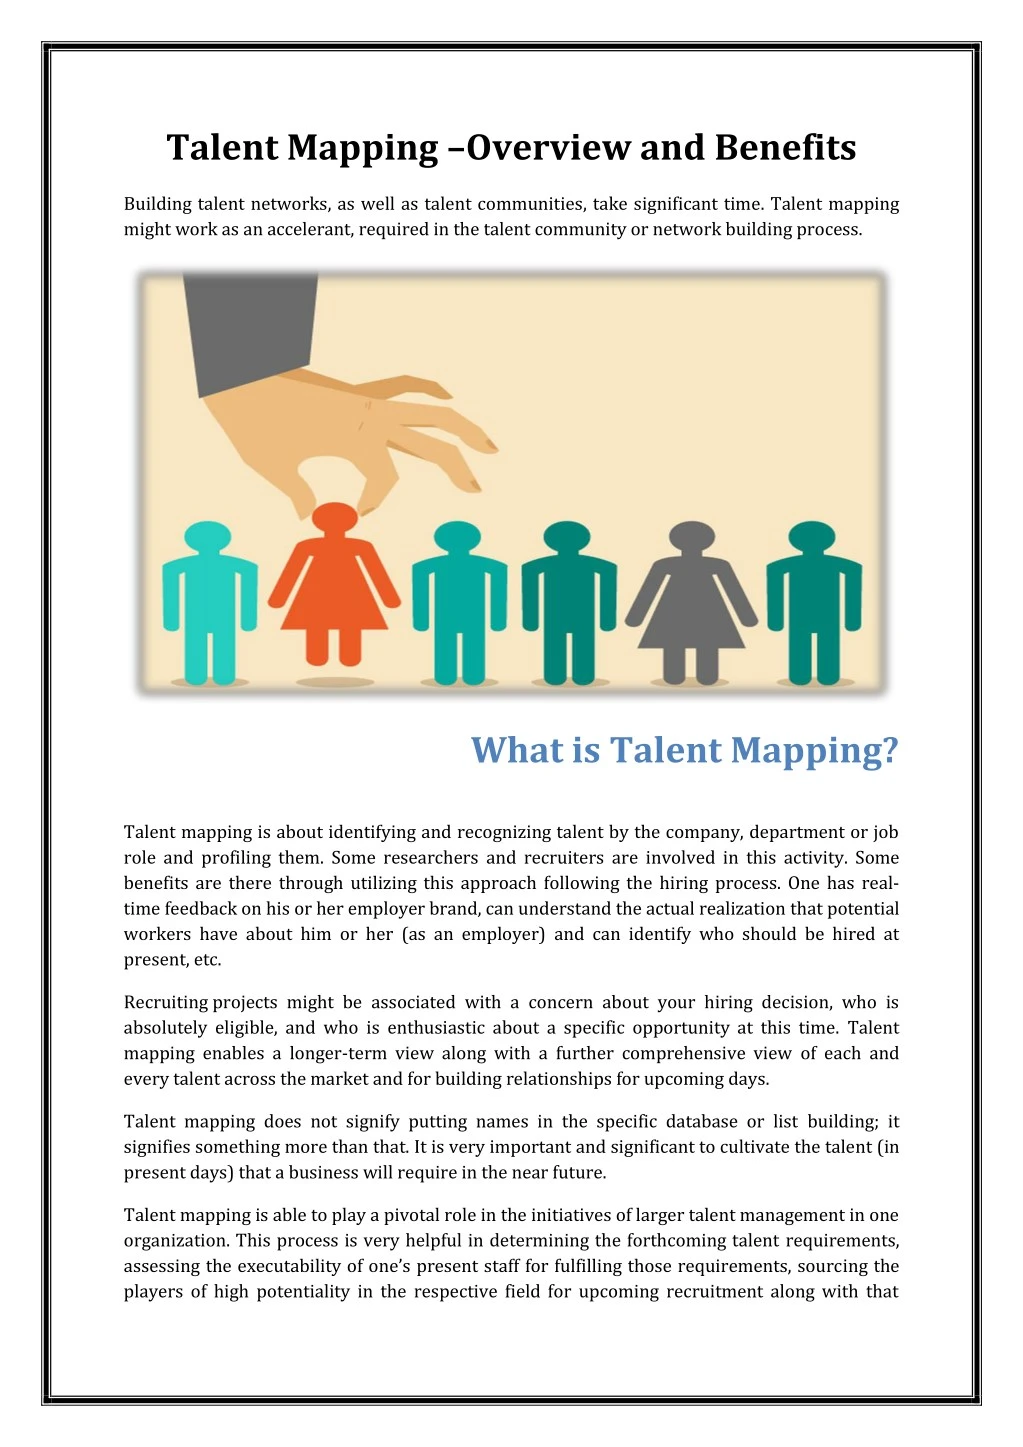 ppt-talent-mapping-overview-and-benefits-powerpoint-presentation